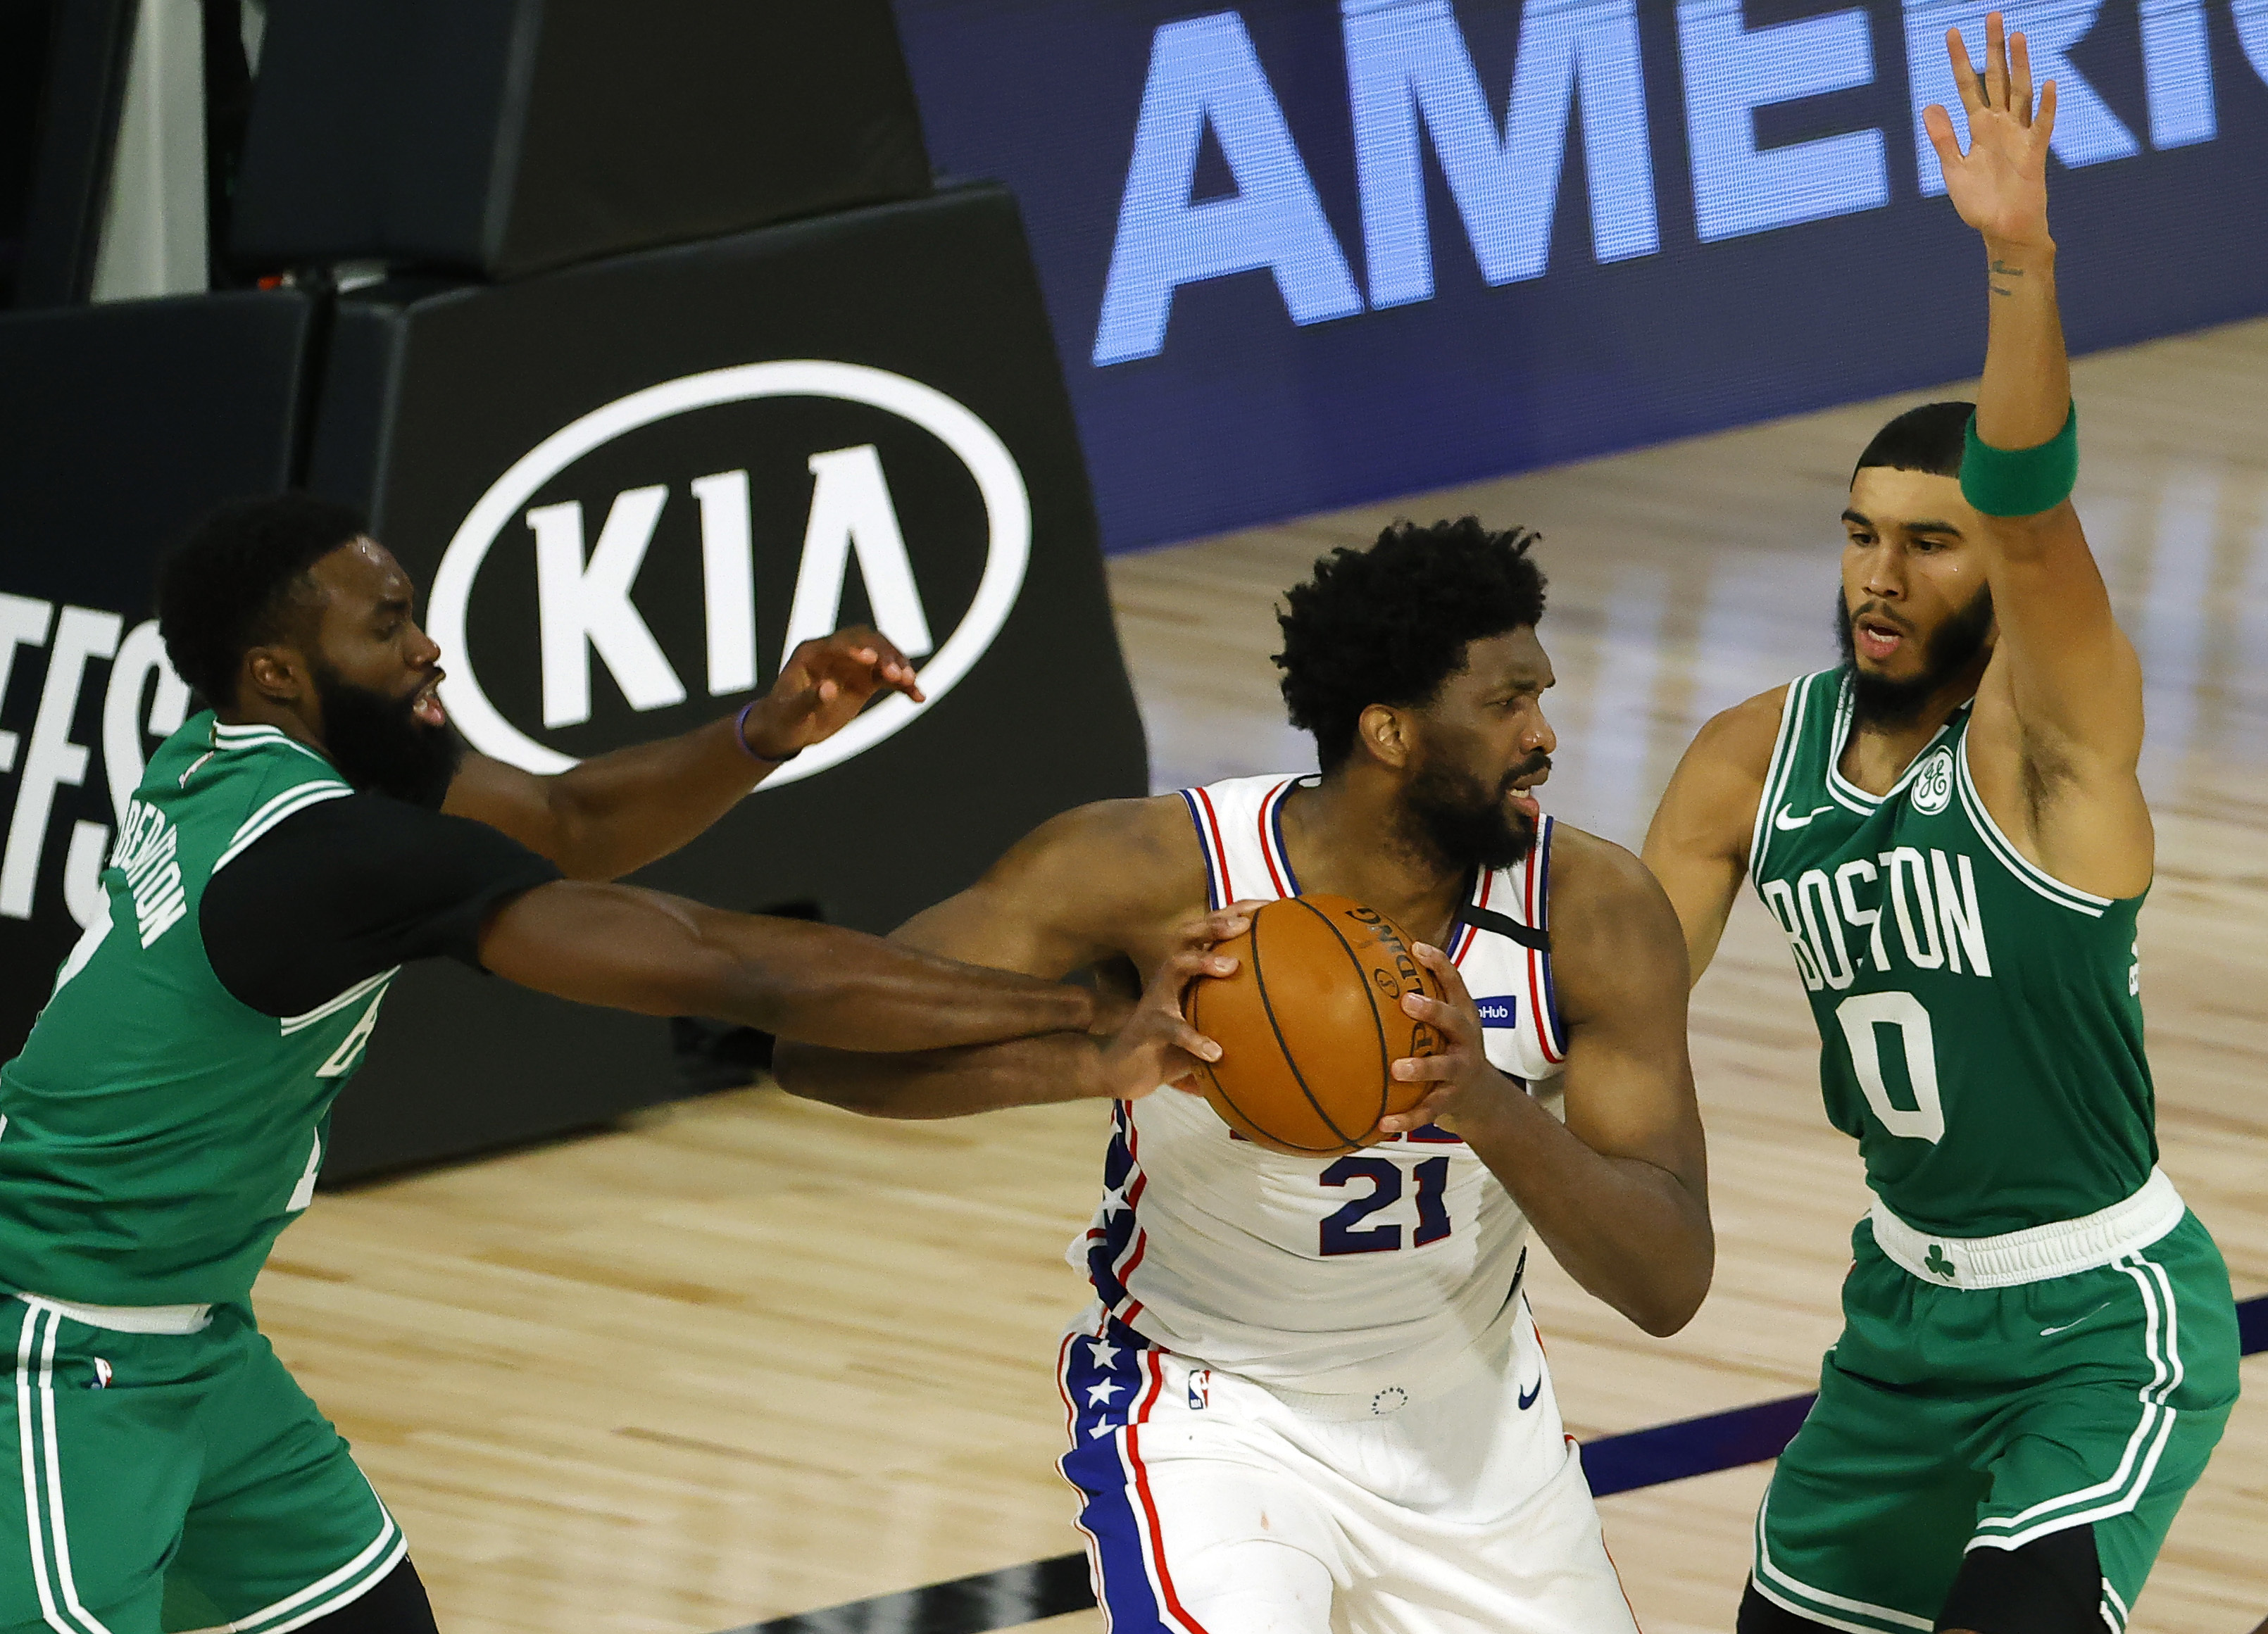 Sixers overwhelmed by Boston Celtics in Game 2 loss, spoiling Joel